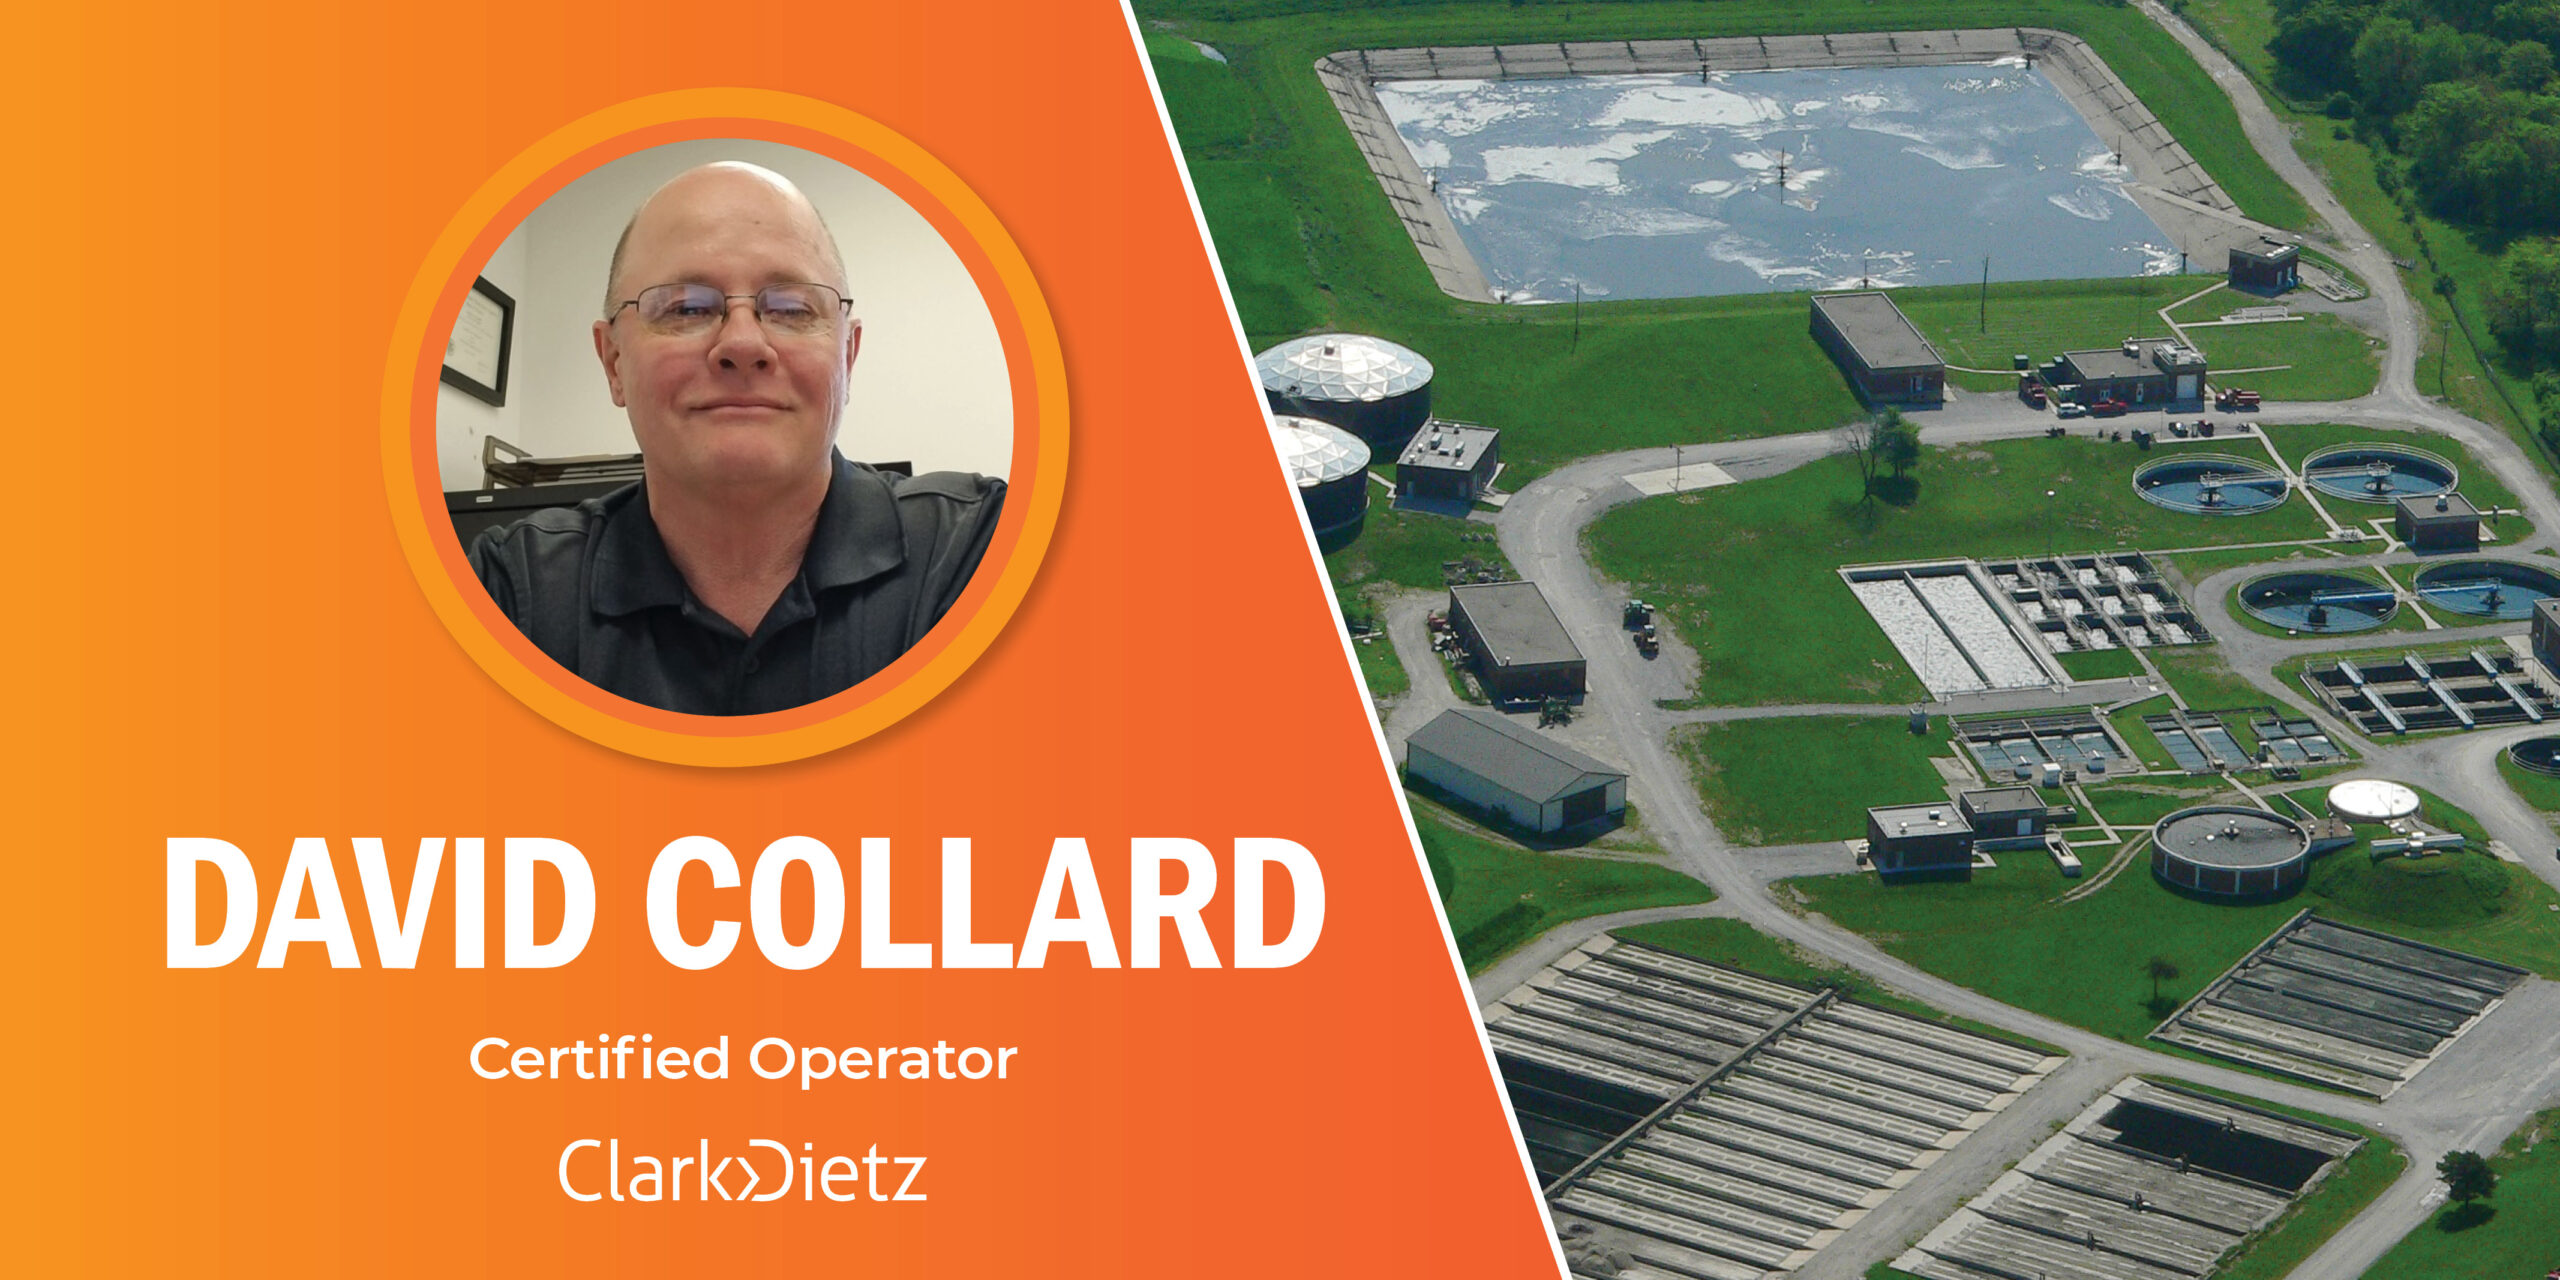 headshot of david collard, certified operator, to the left of an aerial image of a wastewater treatment facility